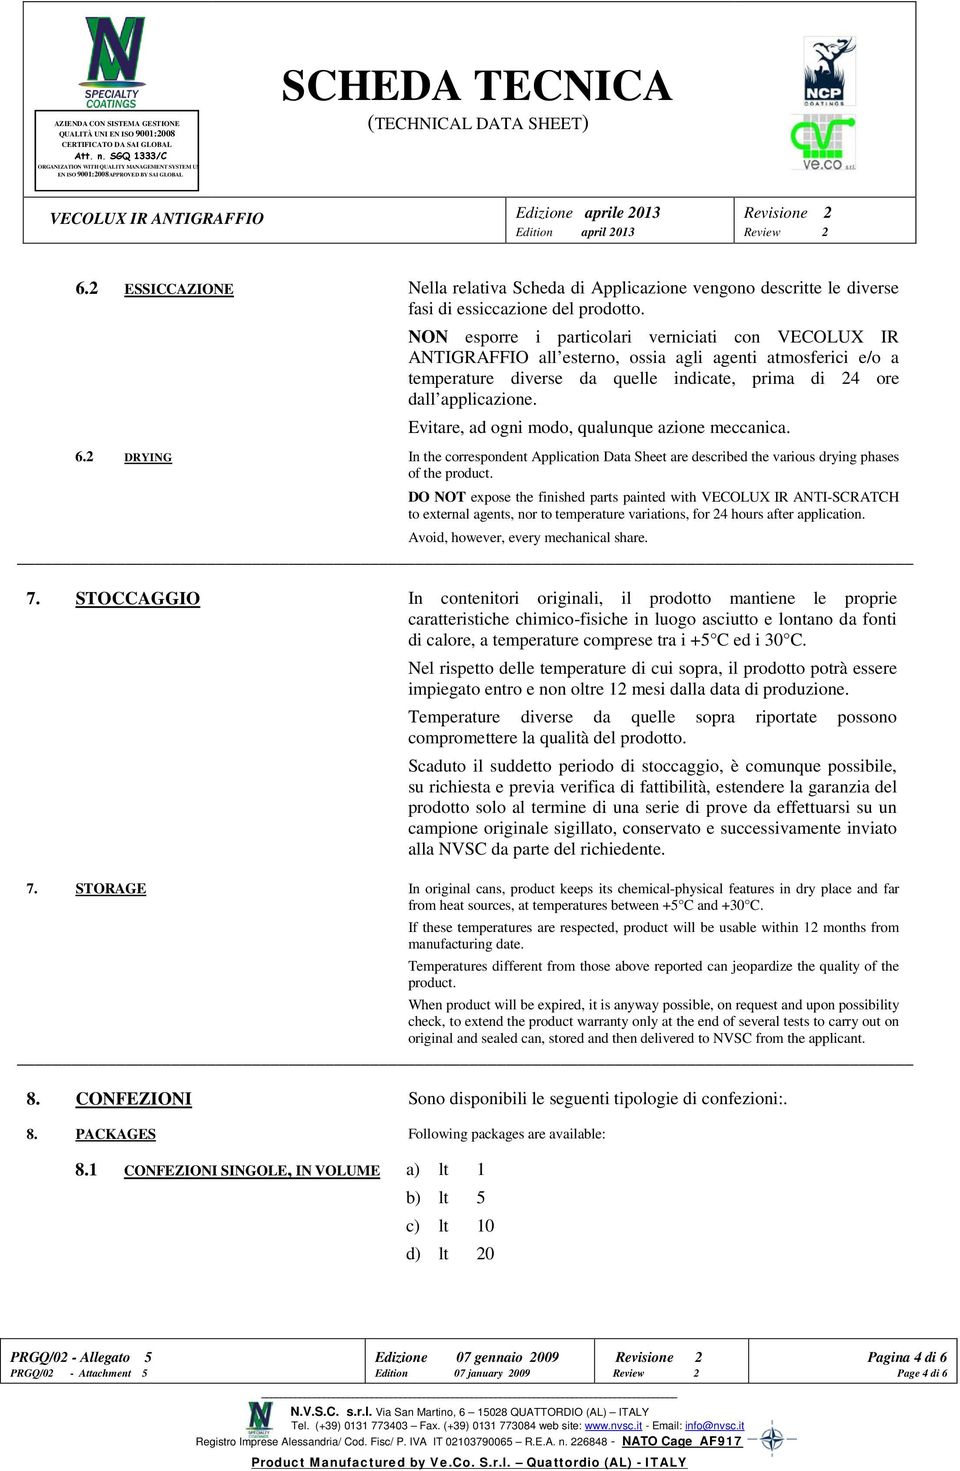 Evitare, ad ogni modo, qualunque azione meccanica. 6.2 DRYING In the correspondent Application Data Sheet are described the various drying phases of the product.